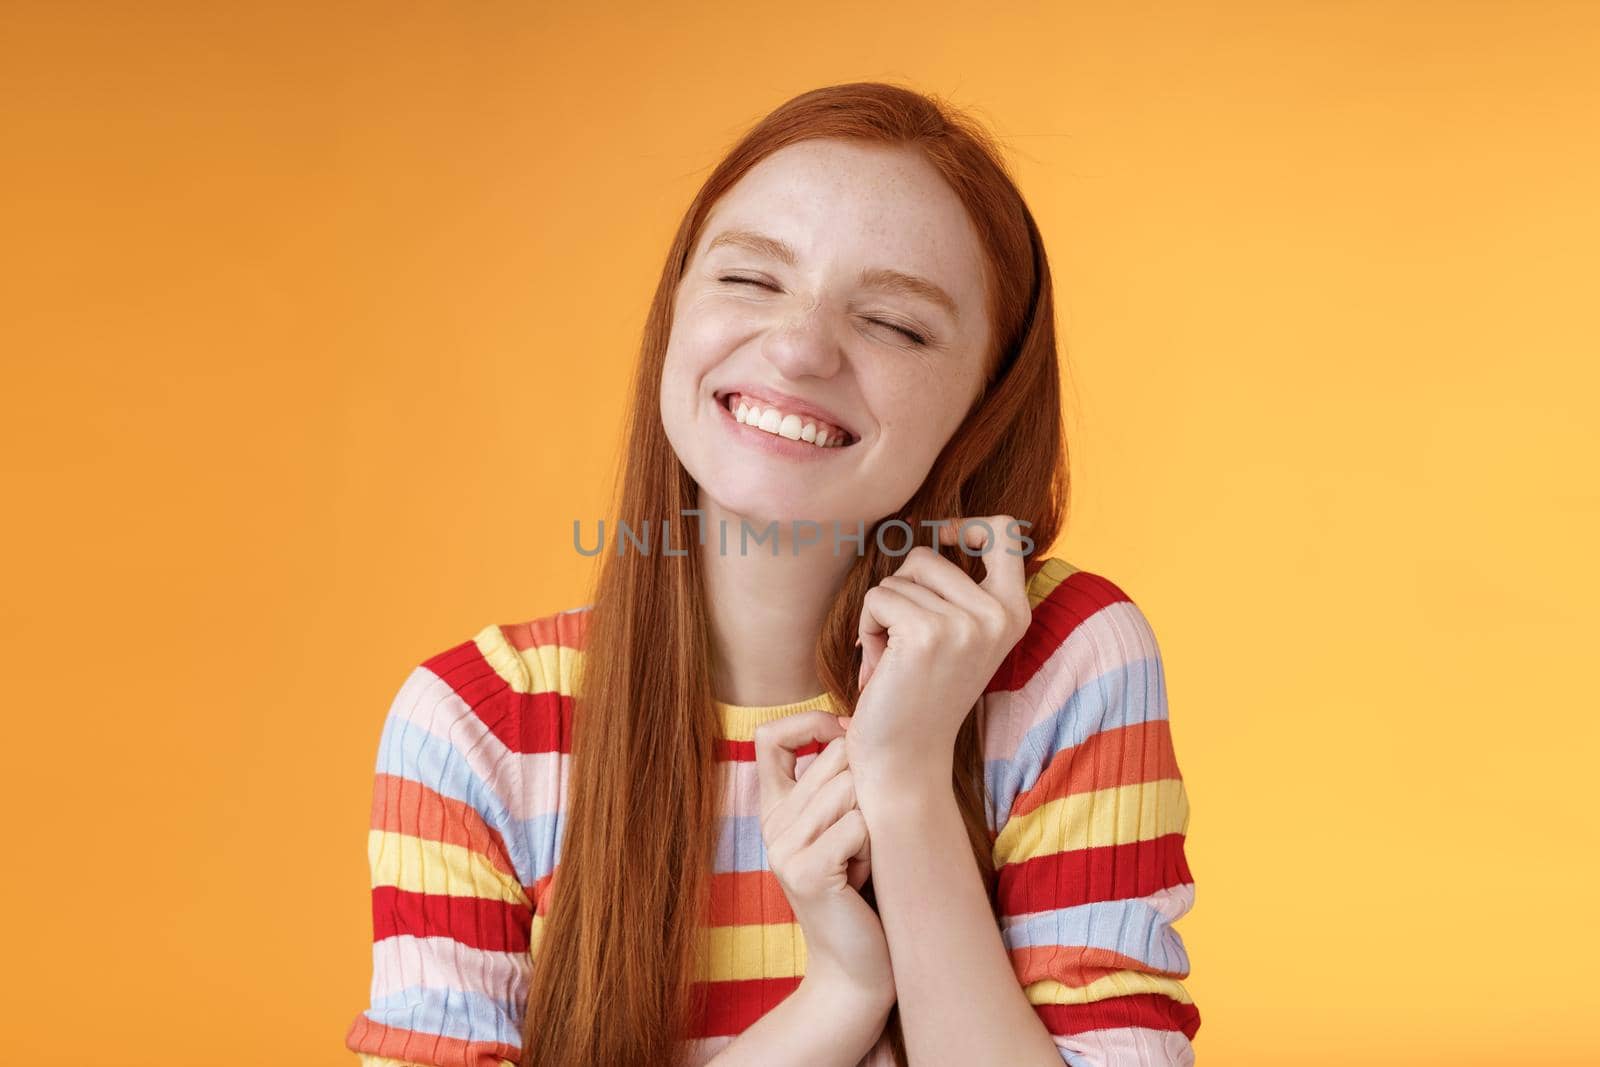 Happy dreamy romantic young tender ginger girl fantasizing creating love story imagination smiling broadly delighted close eyes touching hair strands recalling nice memory, standing orange background.